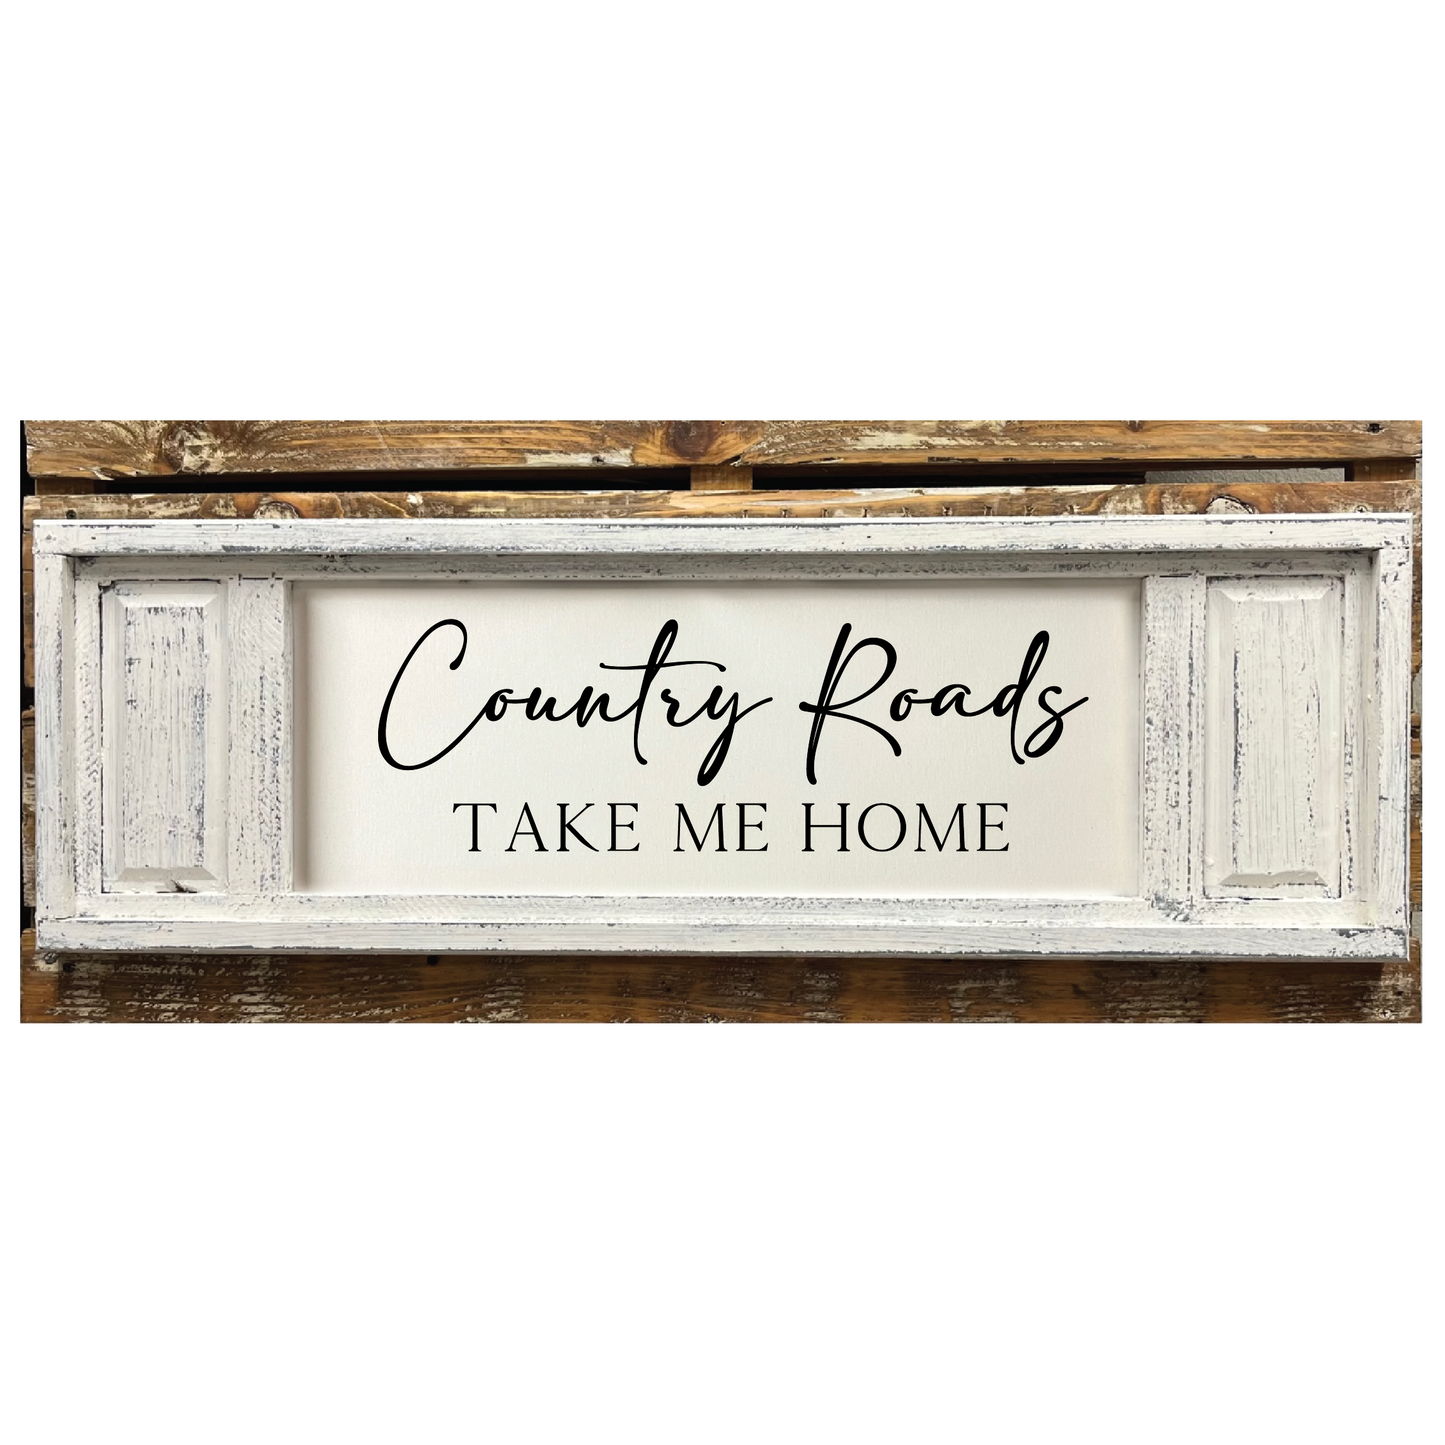 Small Double Panel Canvas Country Roads Take Me Home